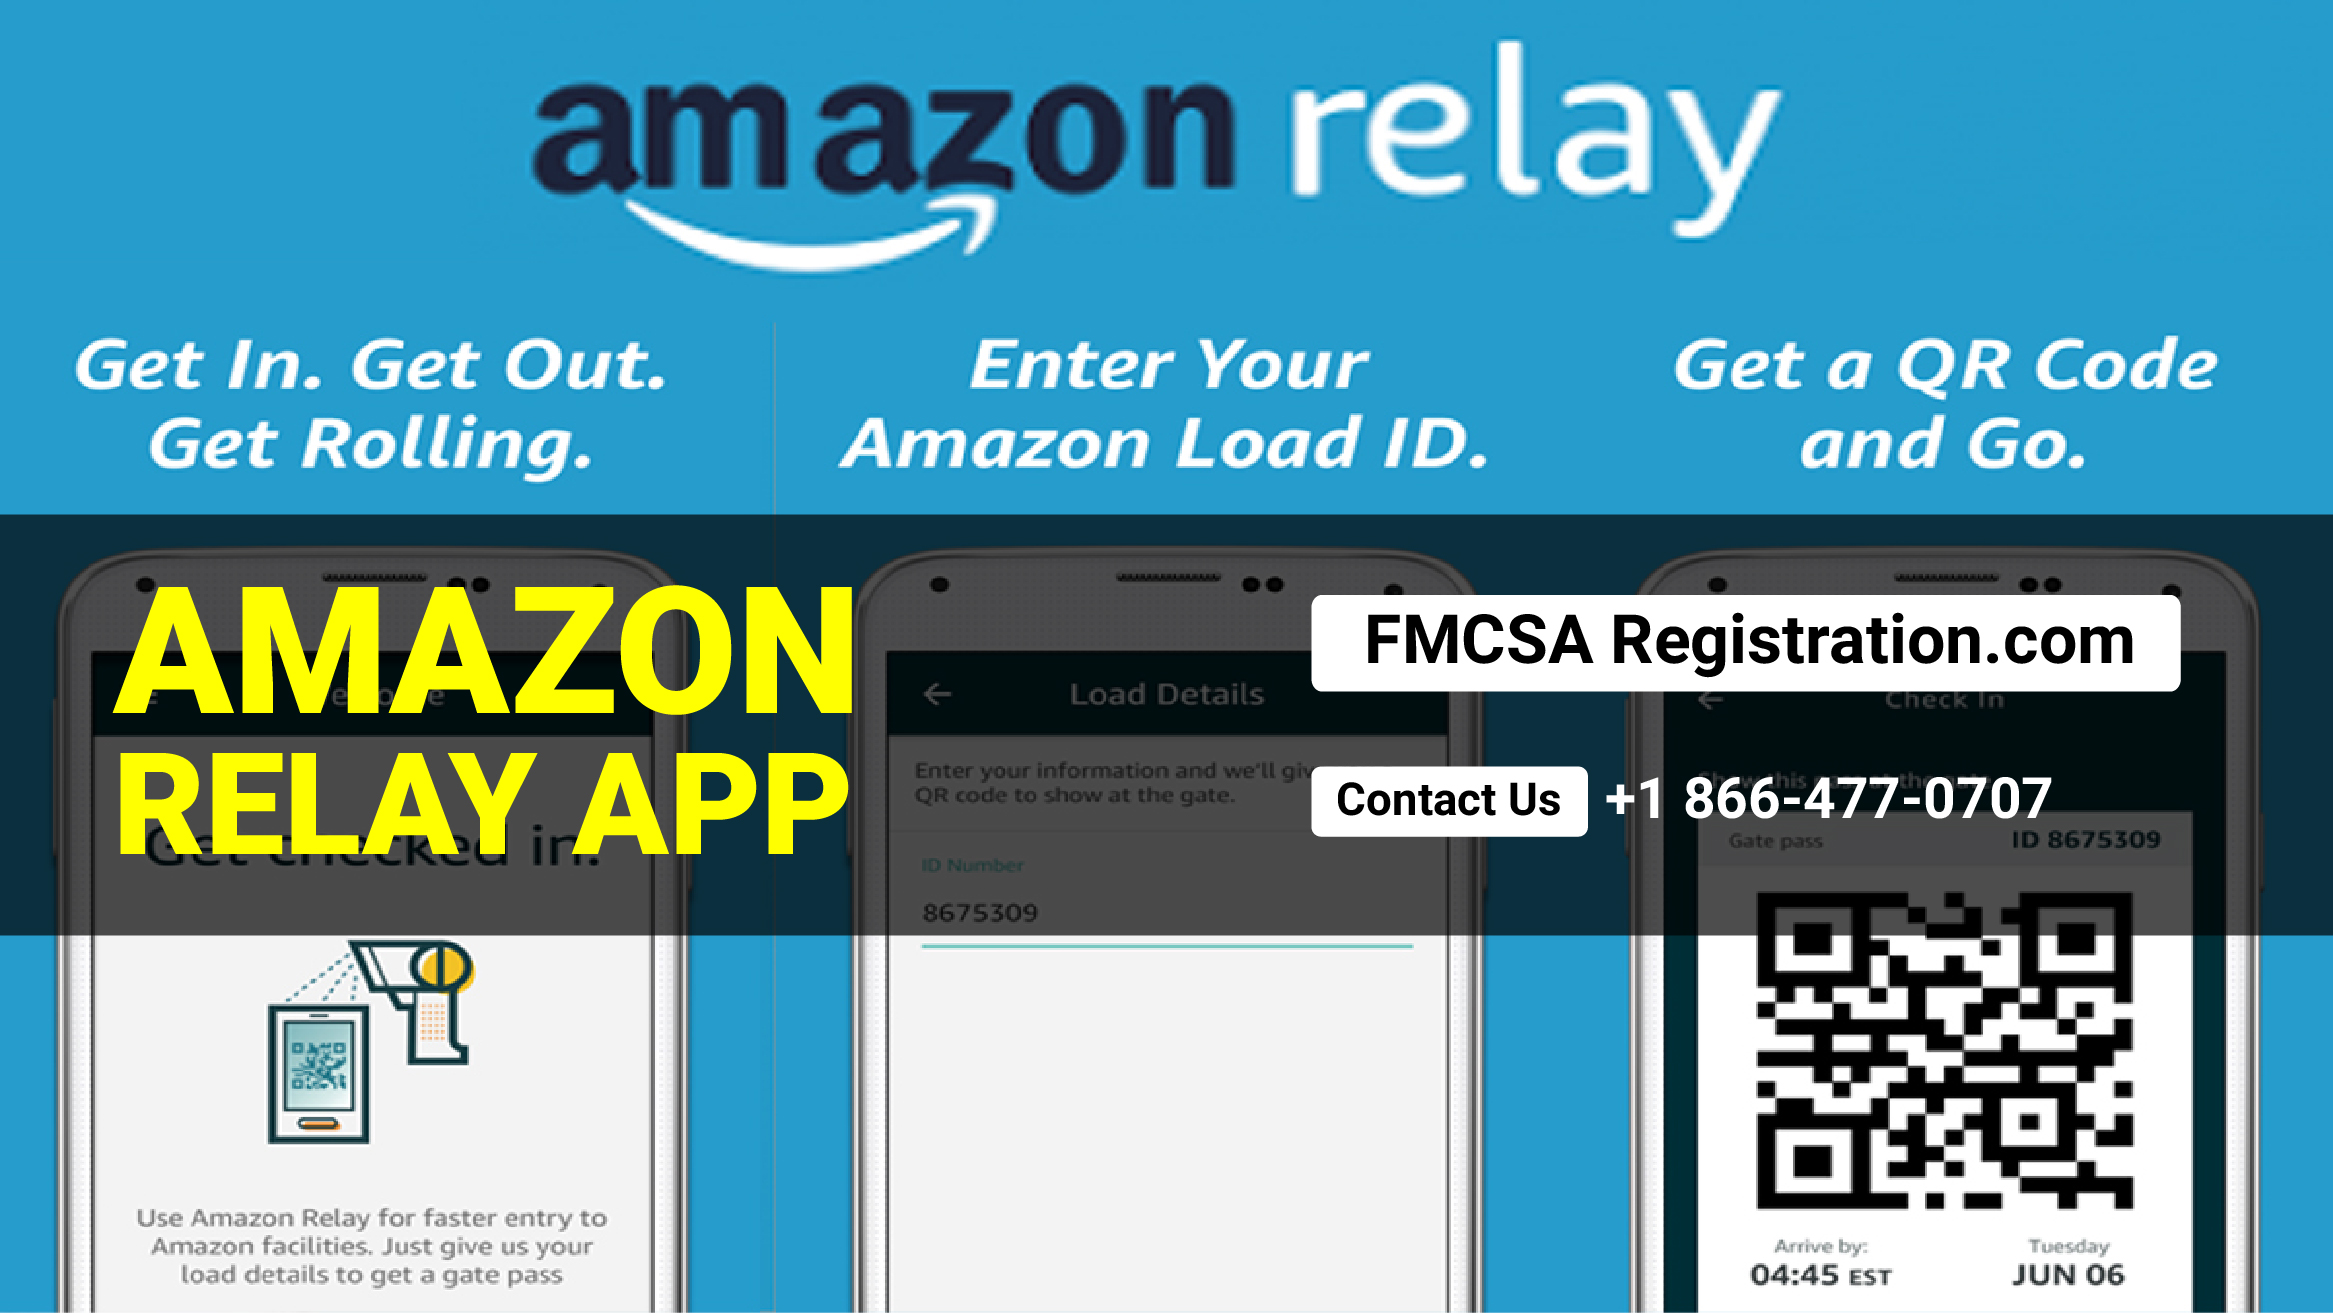 Get DOT and MC Number to apply for Amazon relay